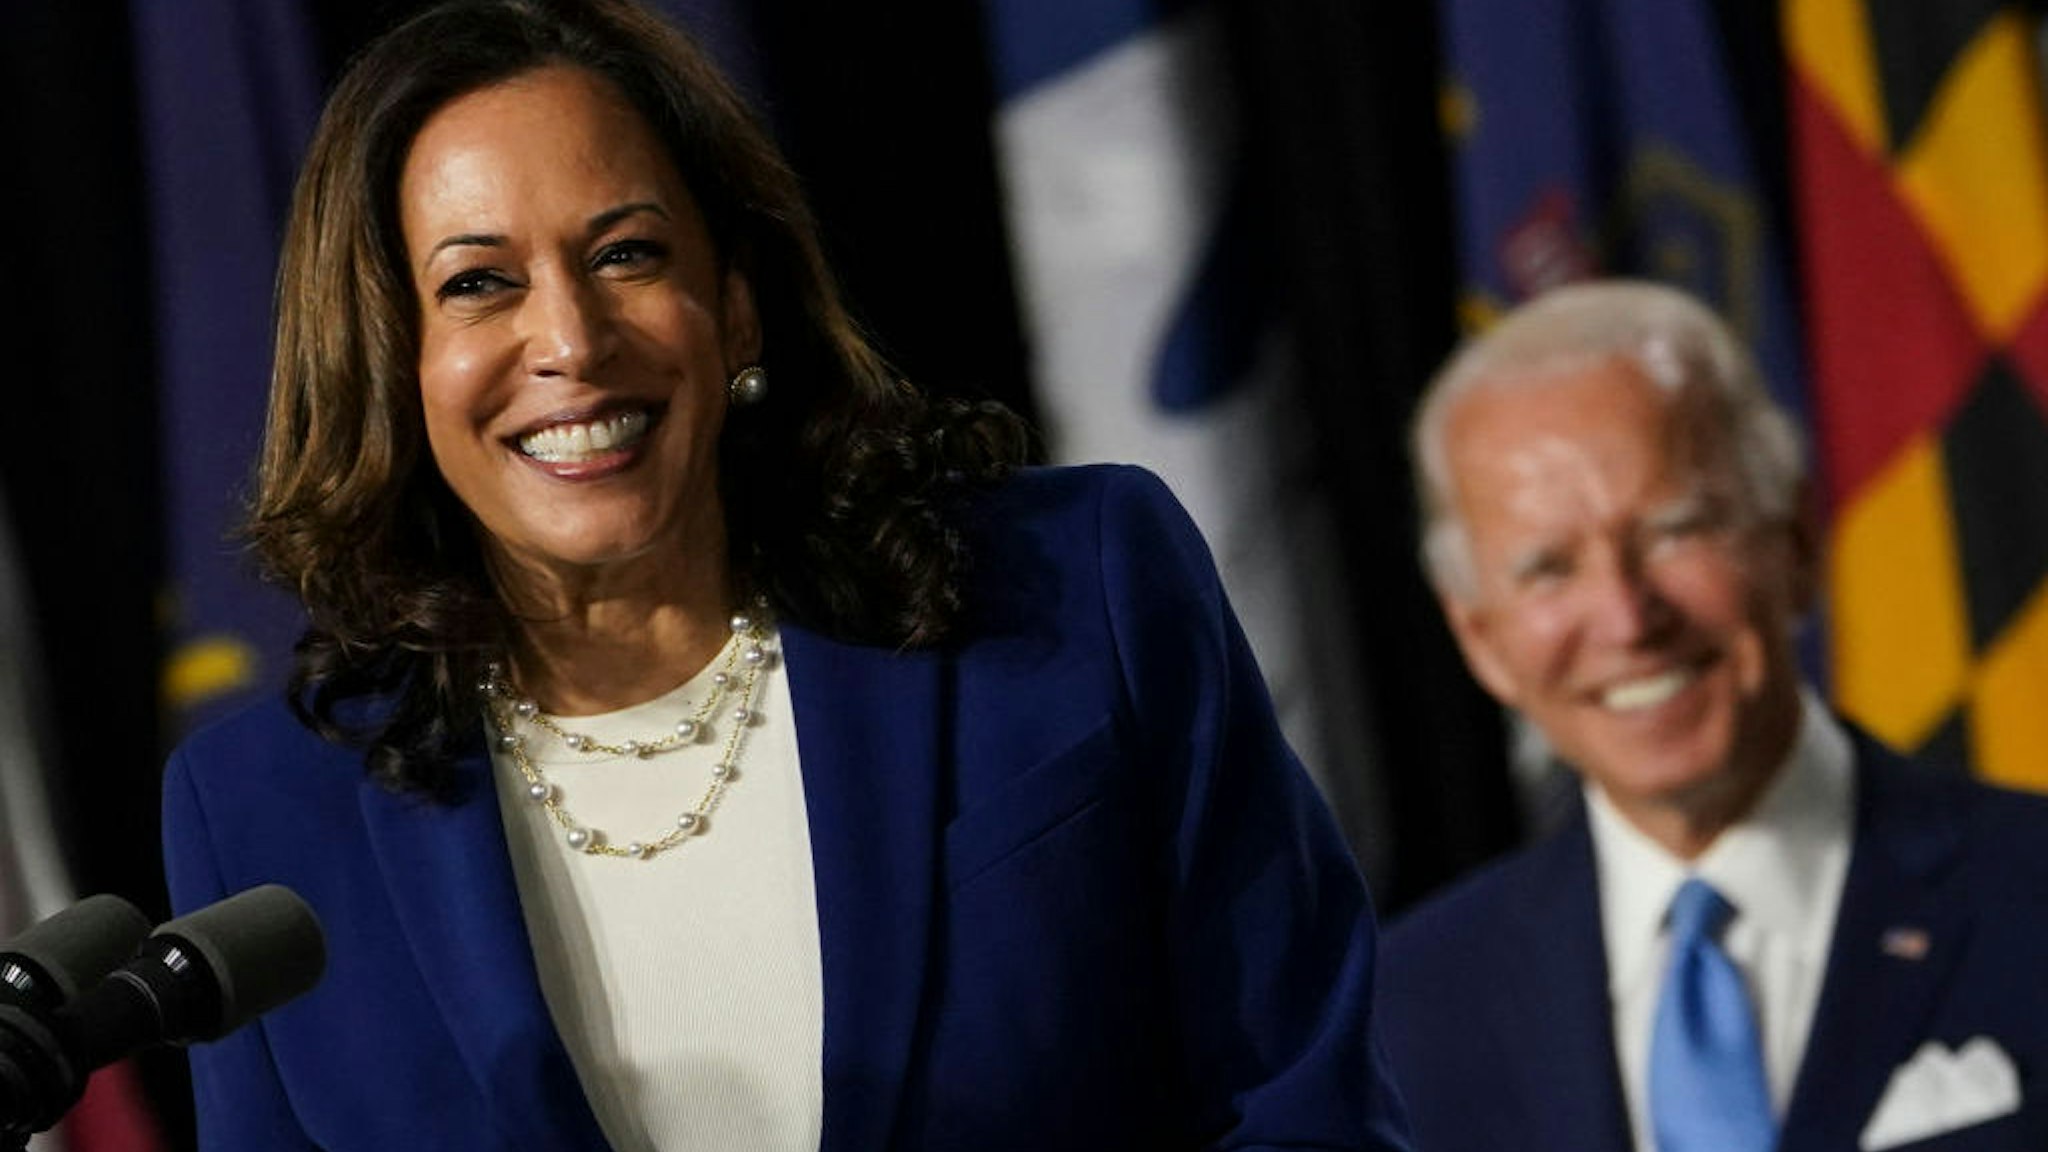 Sen. Kamala D. Harris (D-Calif.) smiles after being introduced by presumptive Democratic presidential nominee Joe Biden as his running mate during an event at Alexis I. DuPont High School in Wilmington, Del., on Wednesday, Aug. 12, 2020. The former vice presidents historic selection makes Harris the first Black woman and first Asian American to run for vice president on a major-party ticket. (Photo by Toni L. Sandys/The Washington Post via Getty Images)